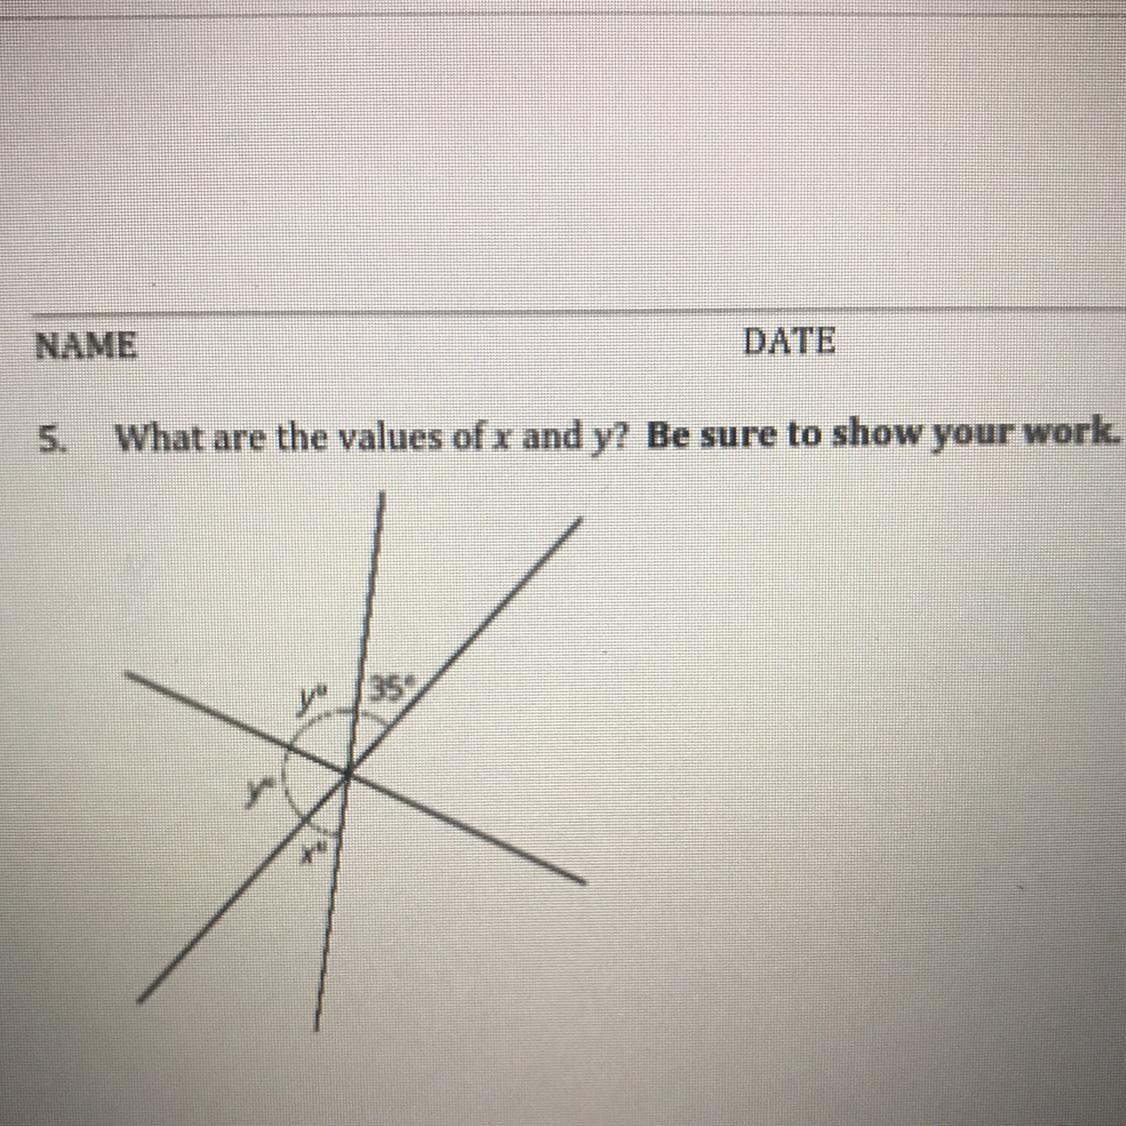 5. What Are The Values Of X And Y? Be Sure To Show Your Work.helpppp Plz Hurry 